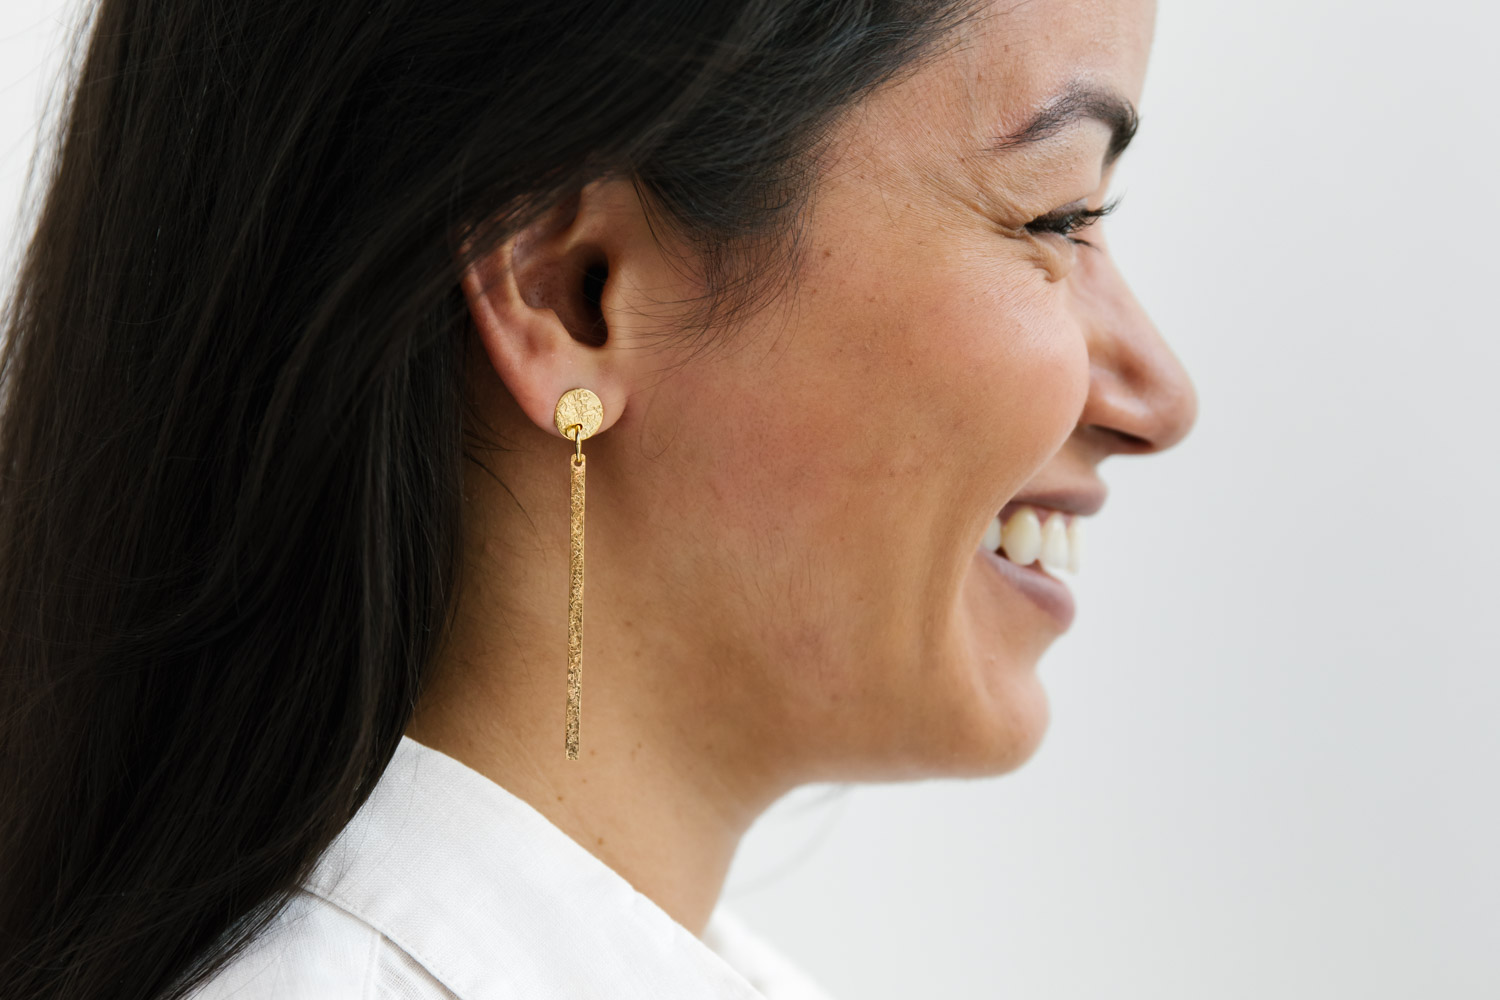 Profile of a woman of colour, smiling and wearing long gold earrings